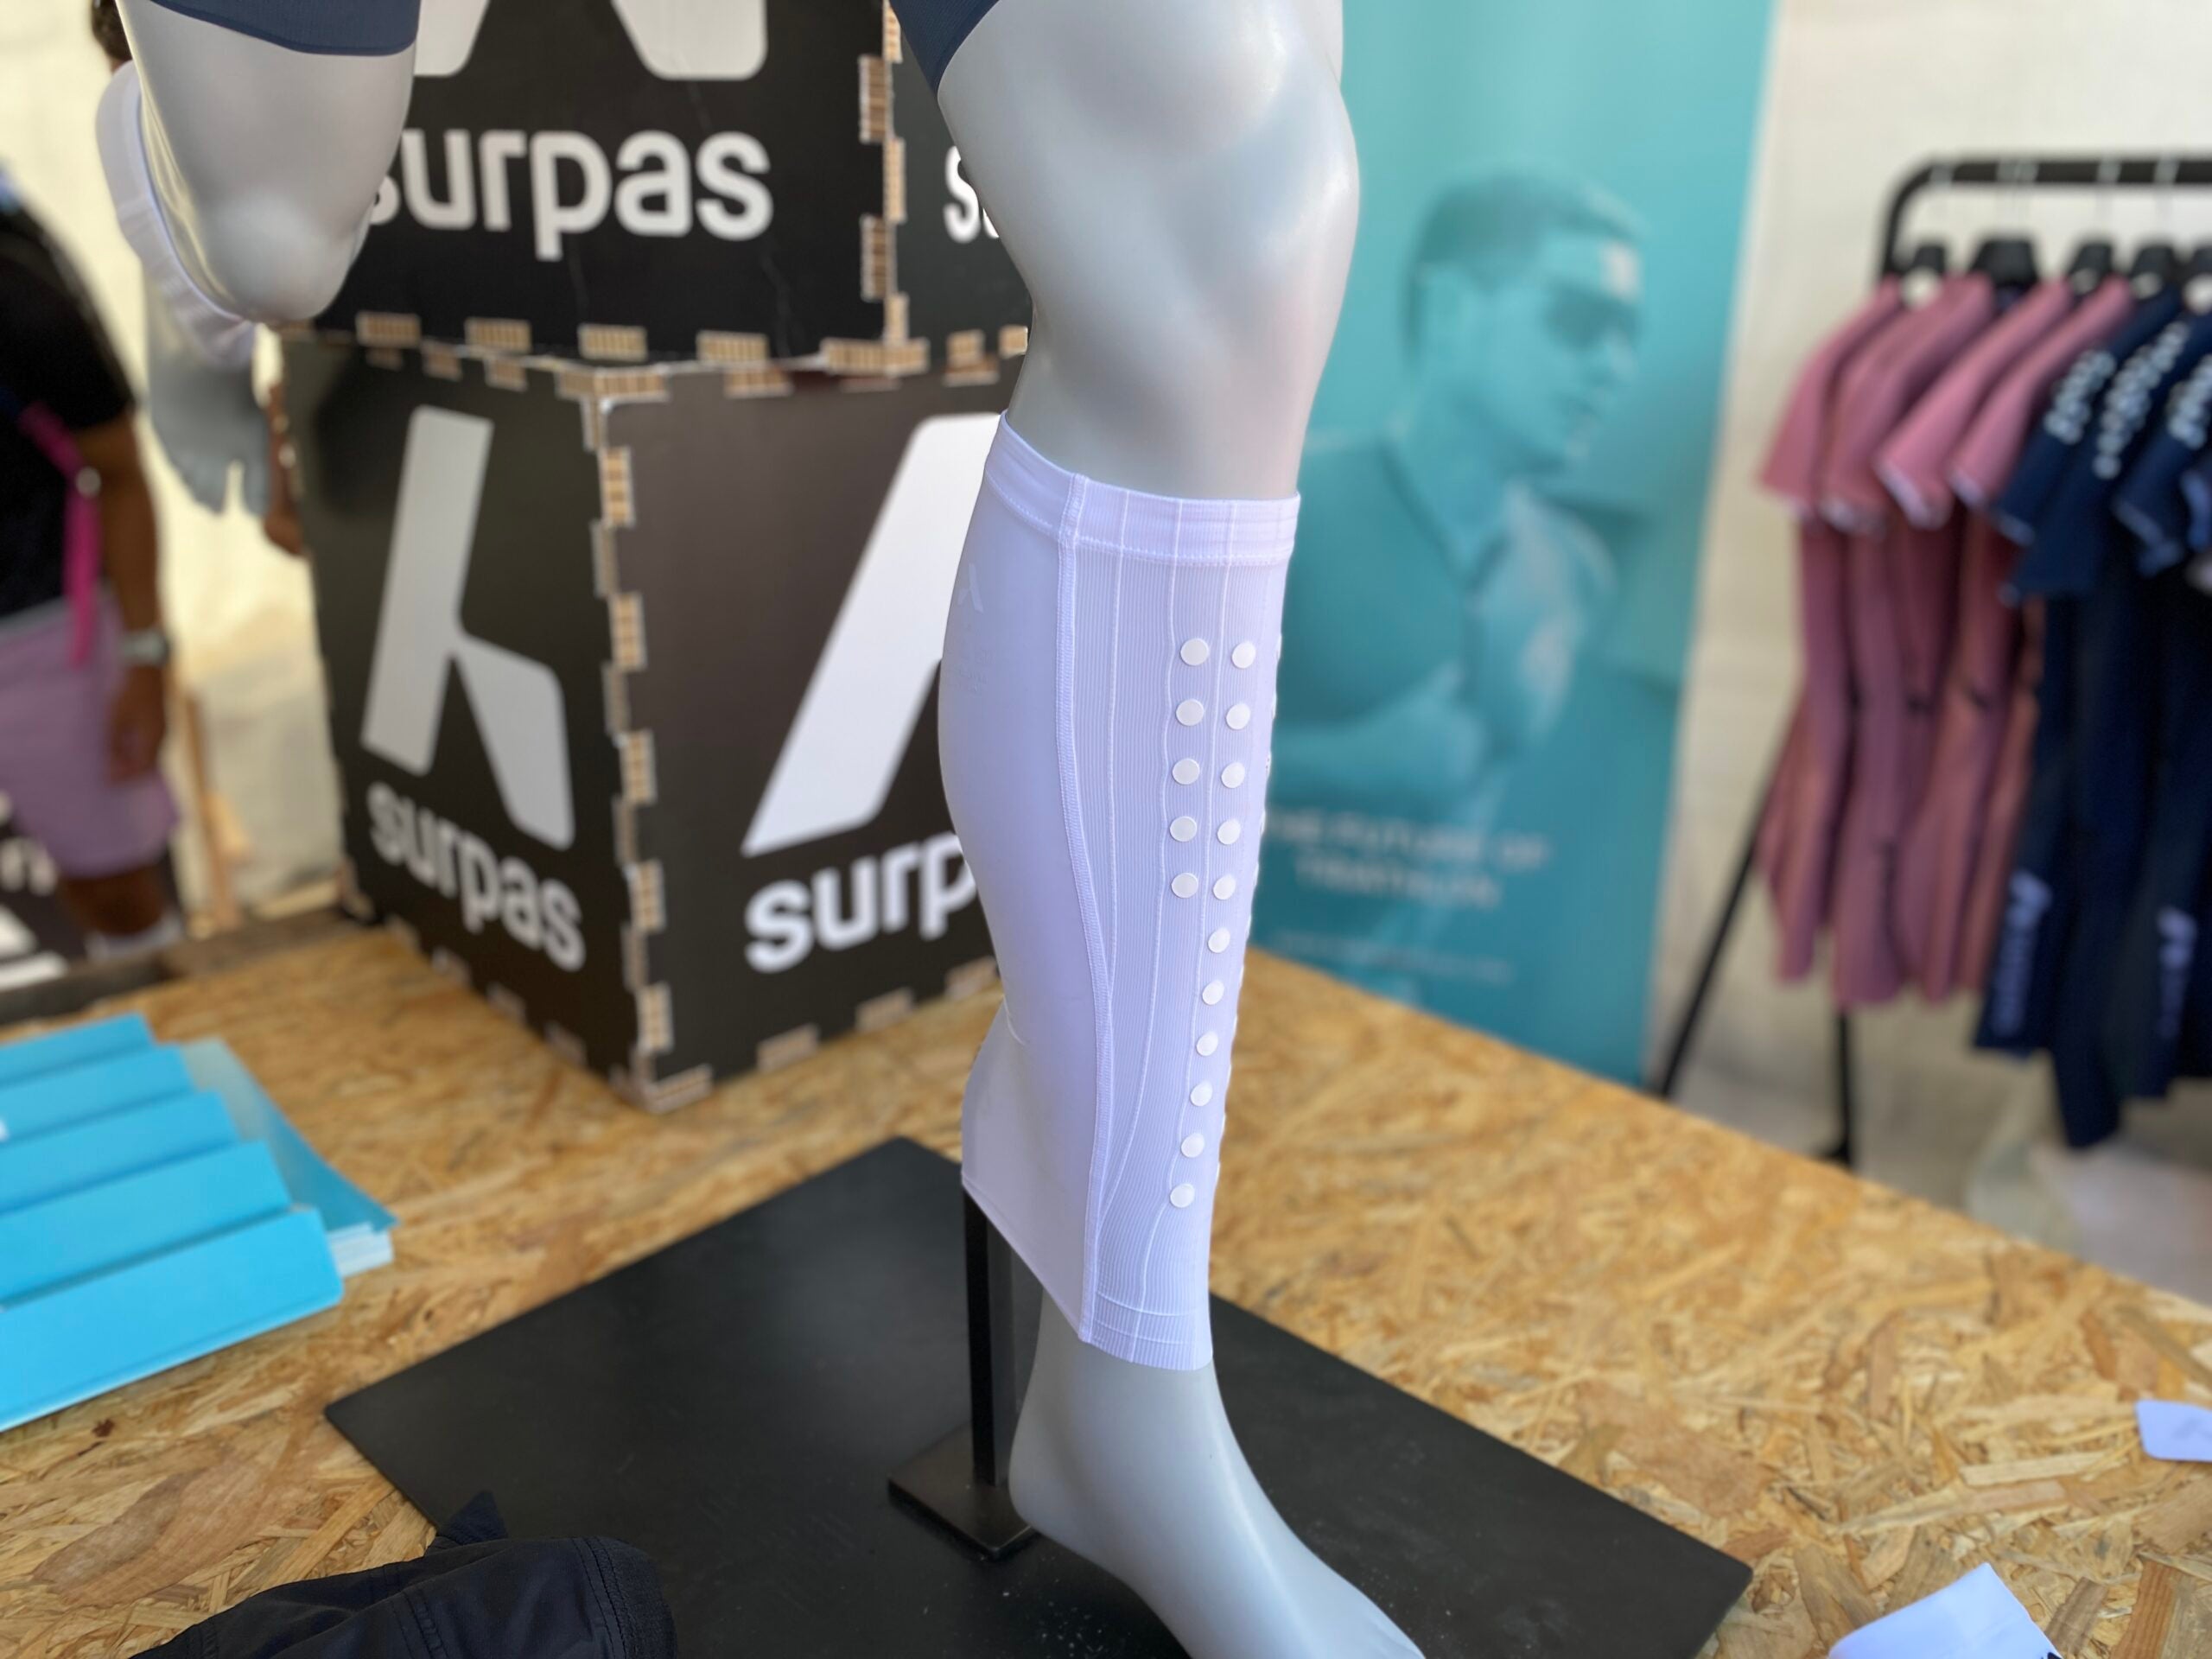 Surpas Calf Sleeves at 2023 Ironman World Championship Expo in Nice, France